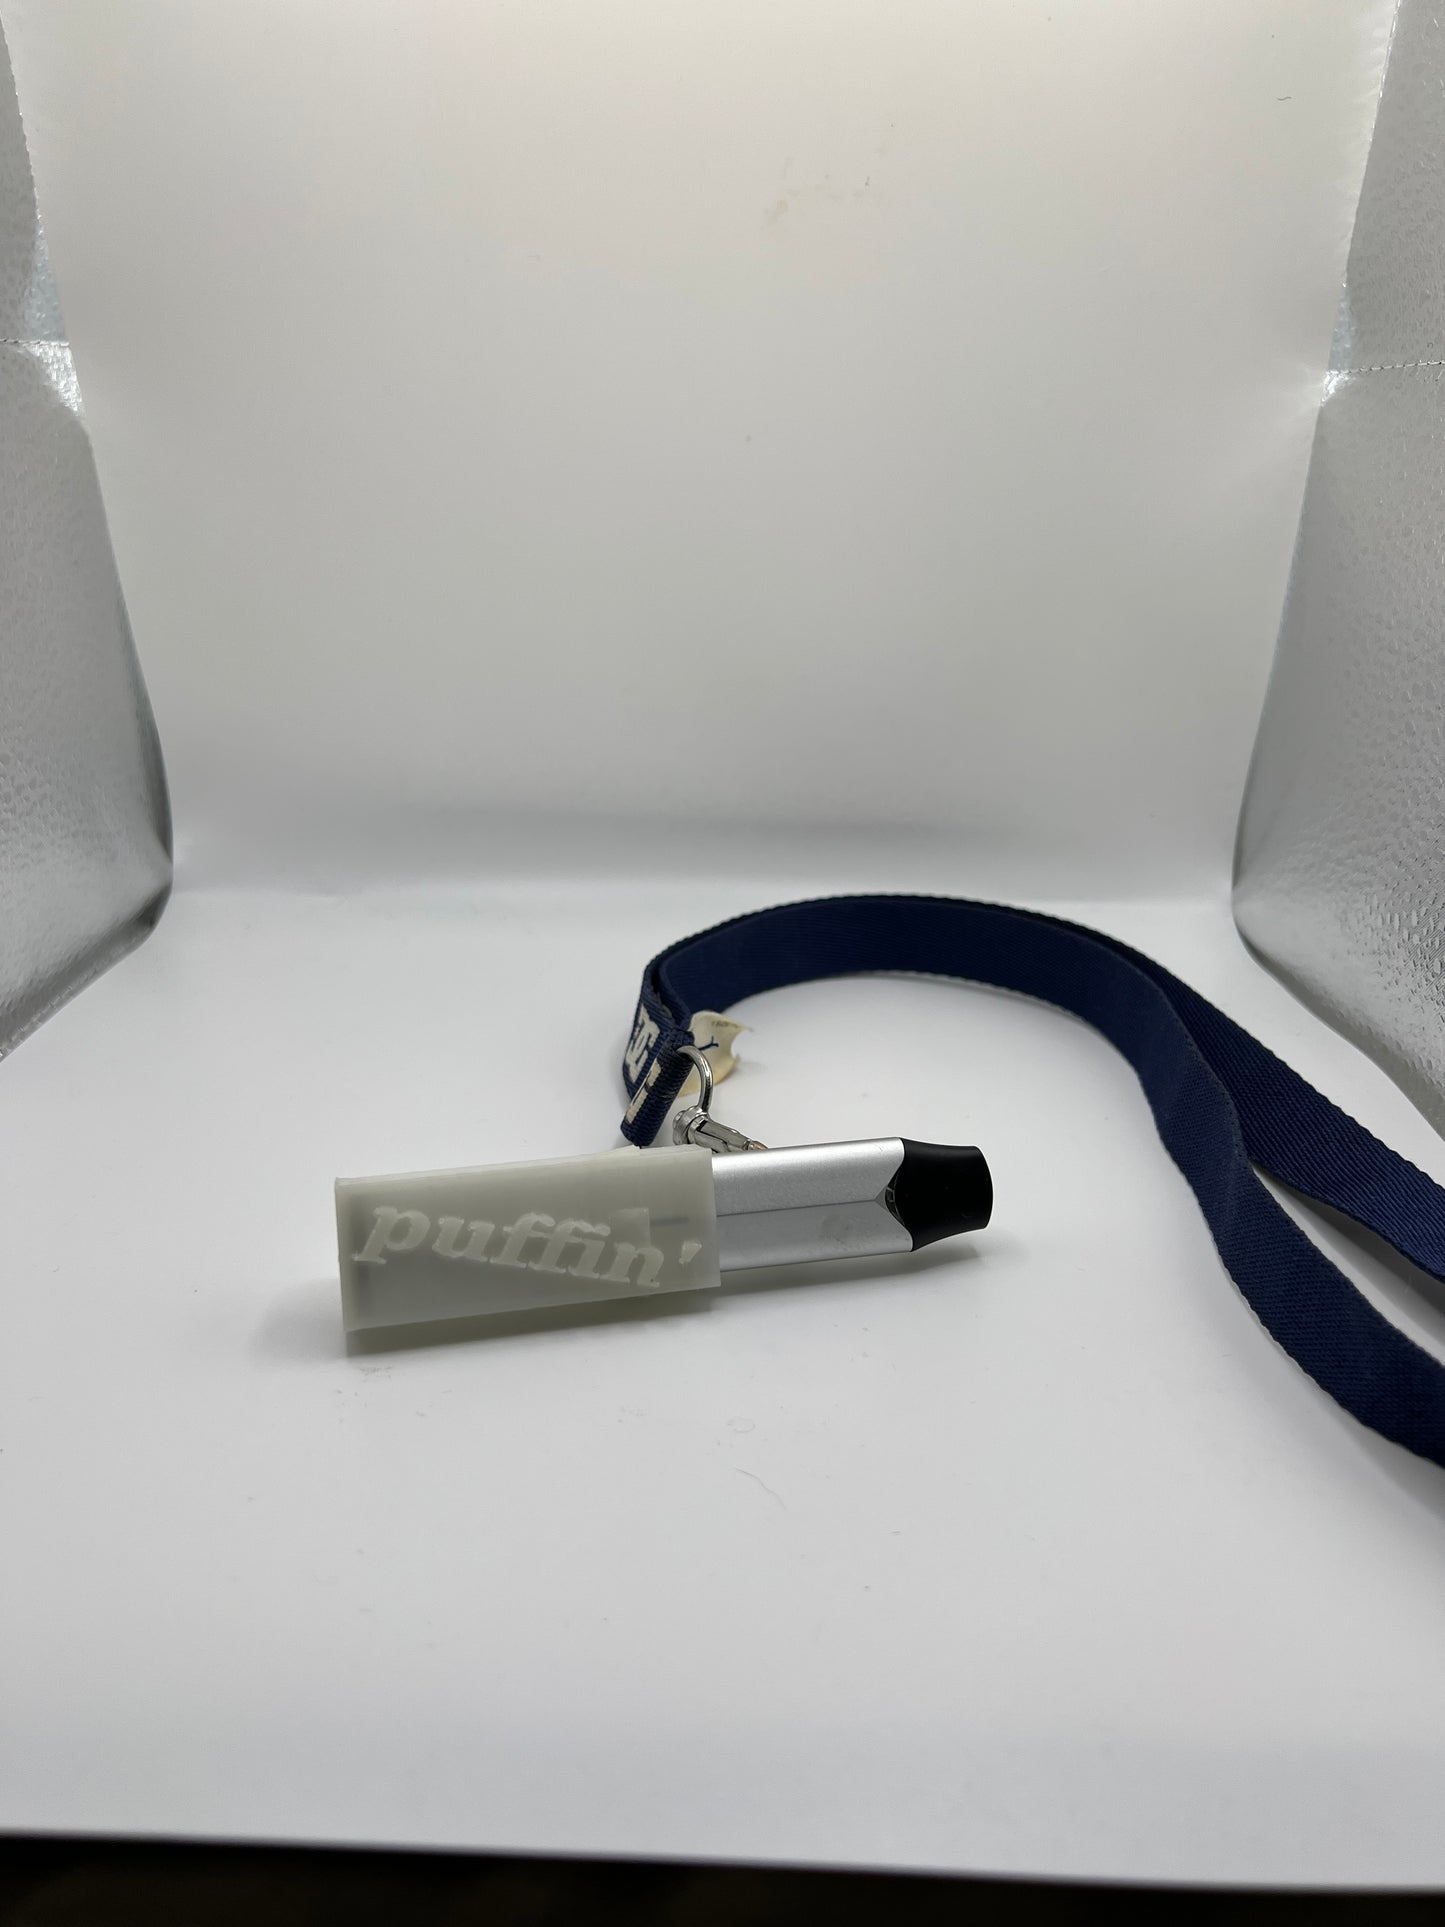 The Puffin' Vuse Holder with Lanyard. Stay Stylish and Secure!